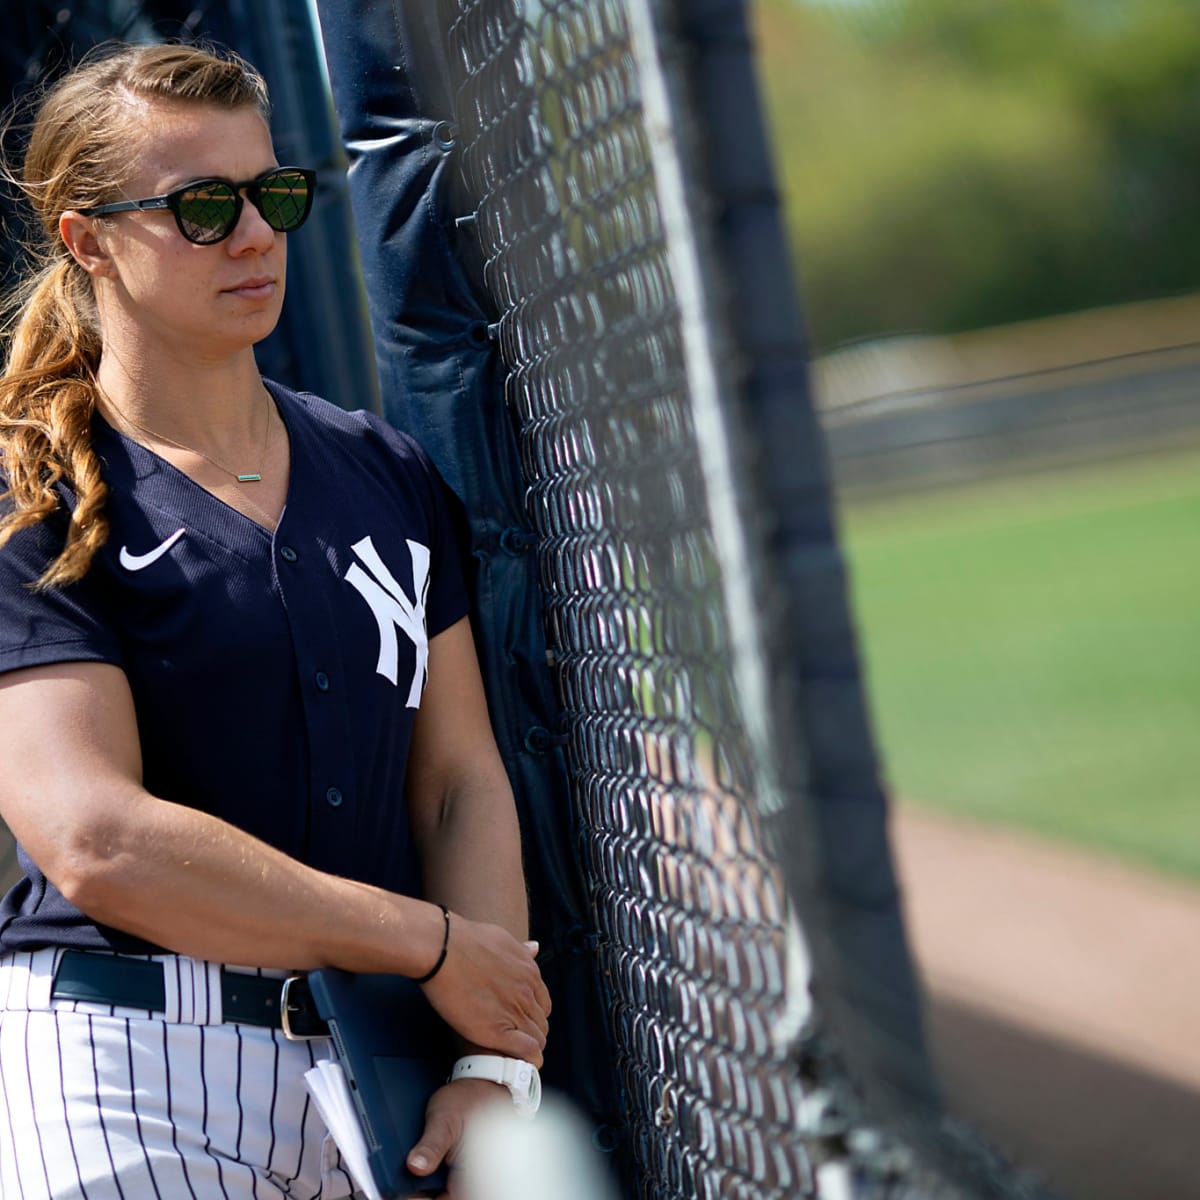 New York Yankees minor league manager Rachel Balkovec wants to be